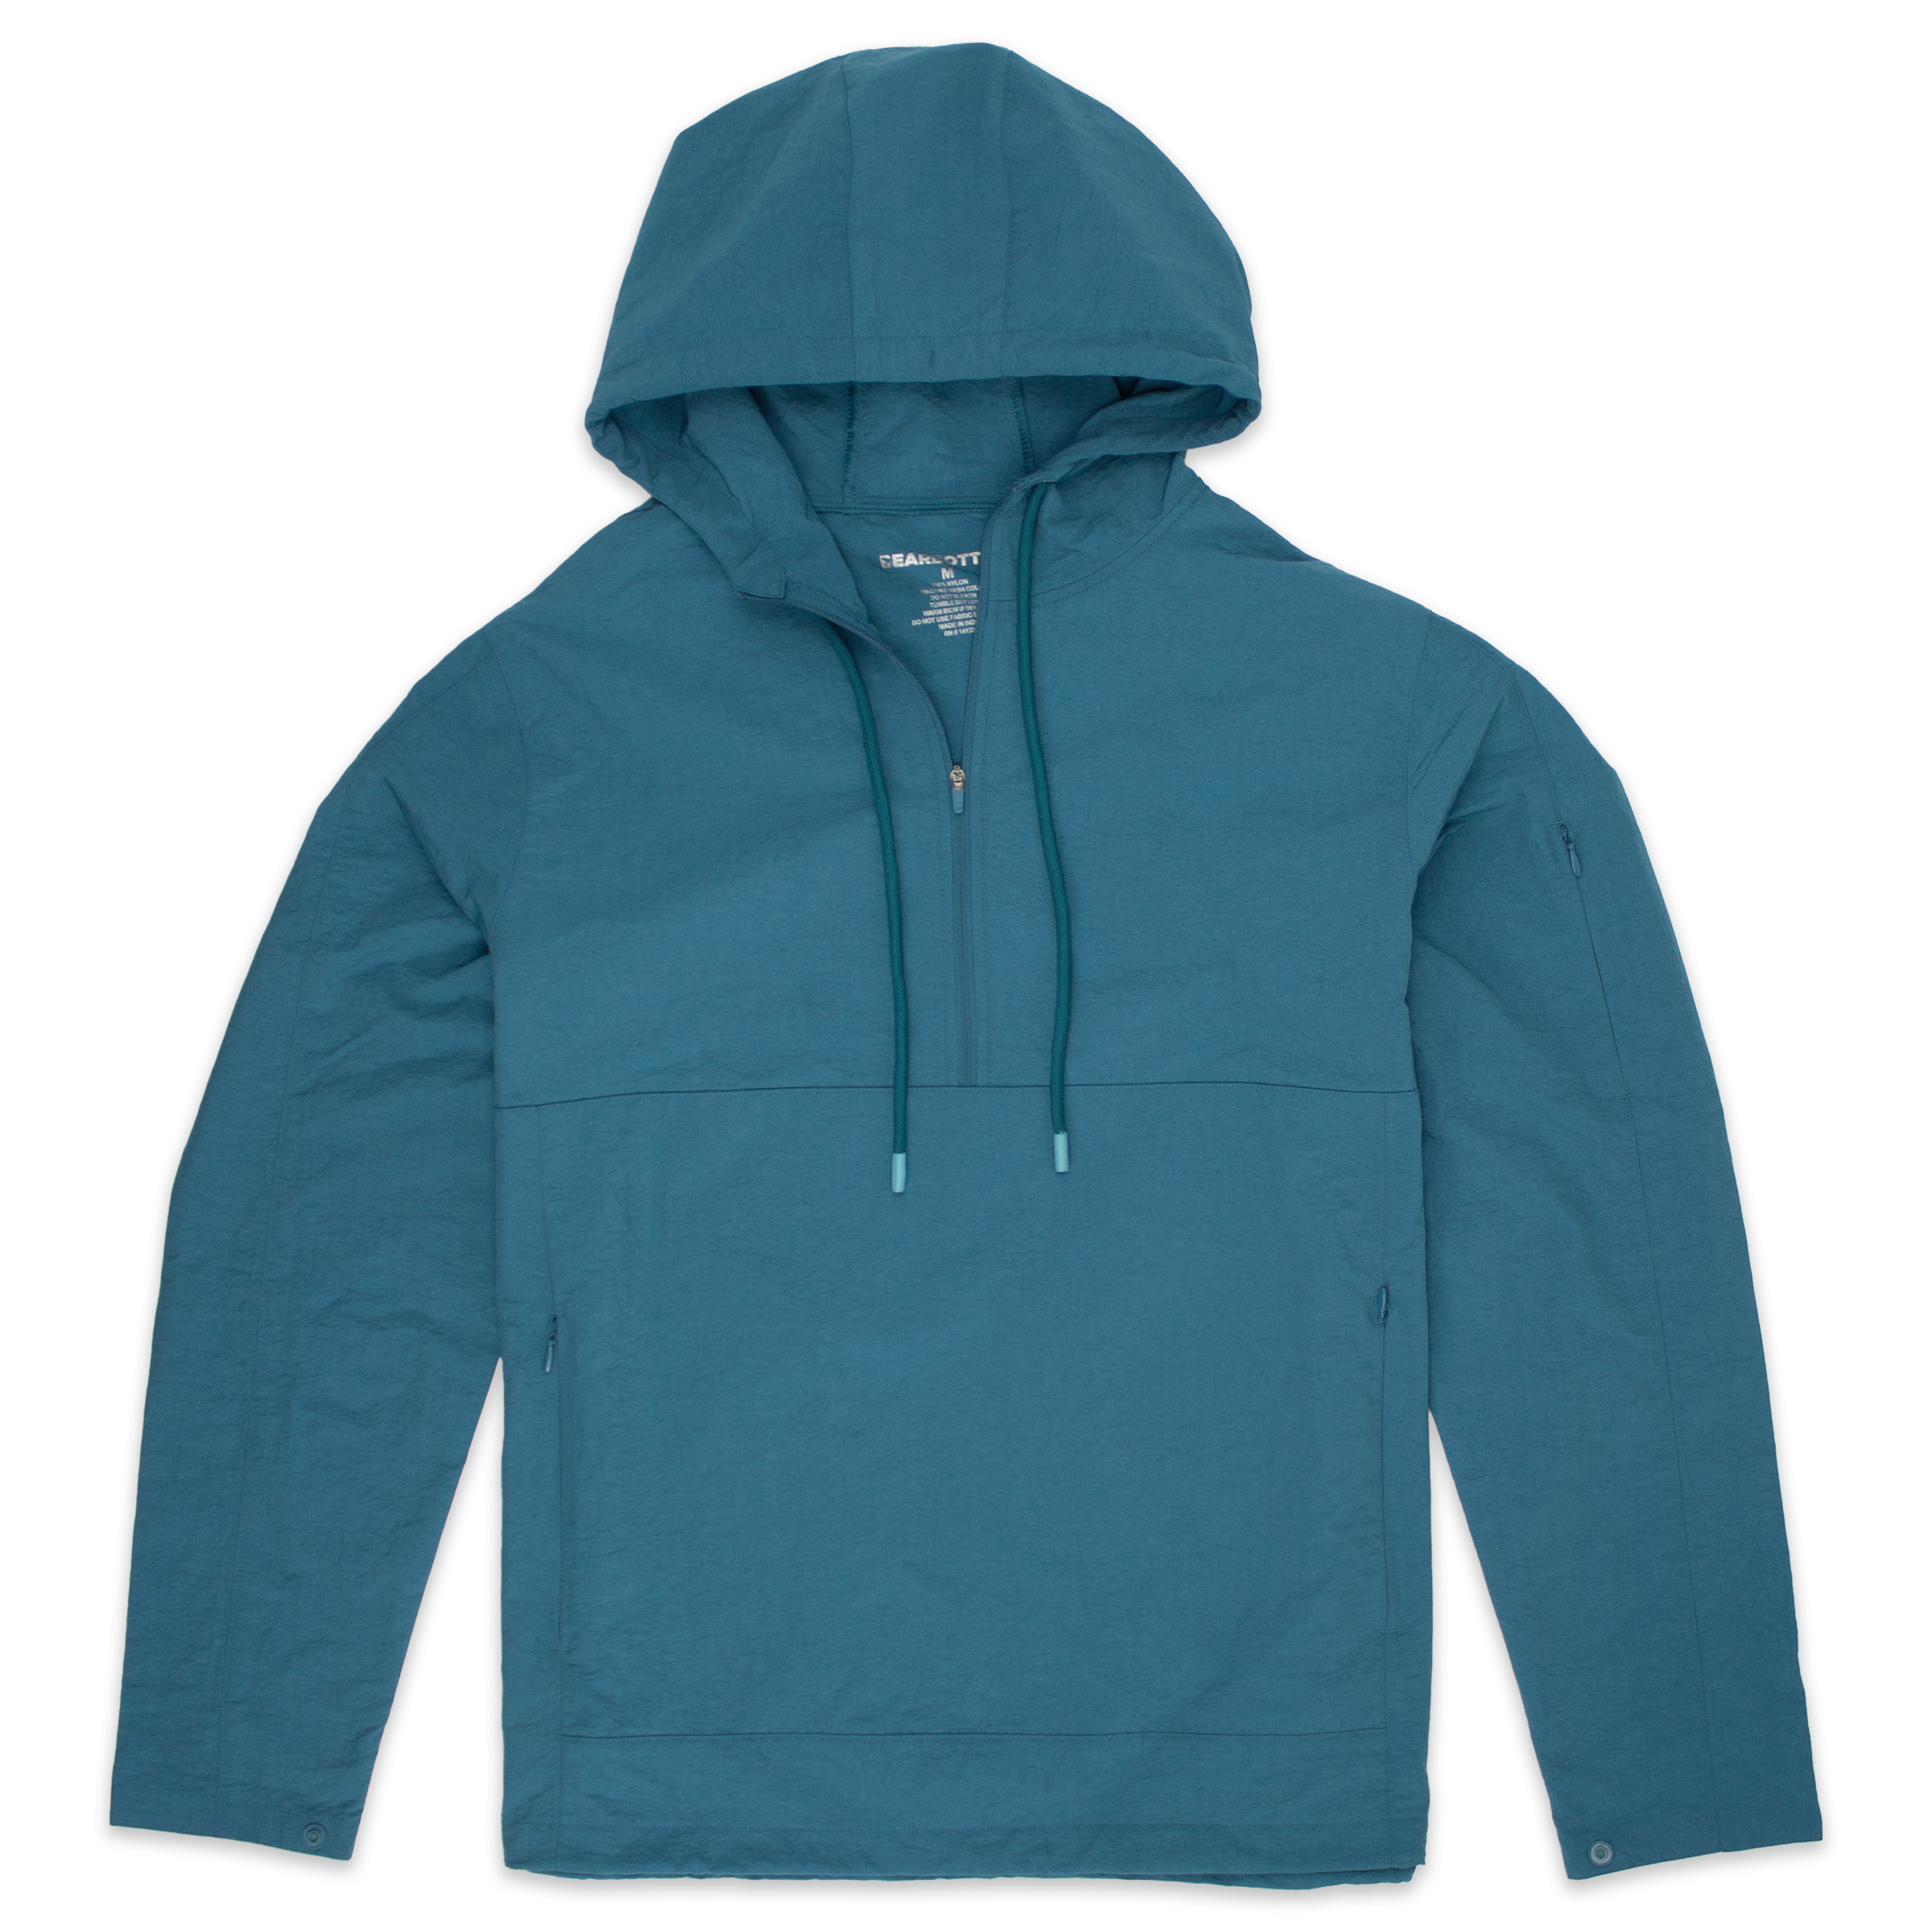 Windbreaker Jacket in Ocean blue with kangaroo pocket with zippers, zipper stash pocket on right arm, wrist snaps for secure fit, rubberized hood drawstring, and three-quarter zipper through collar